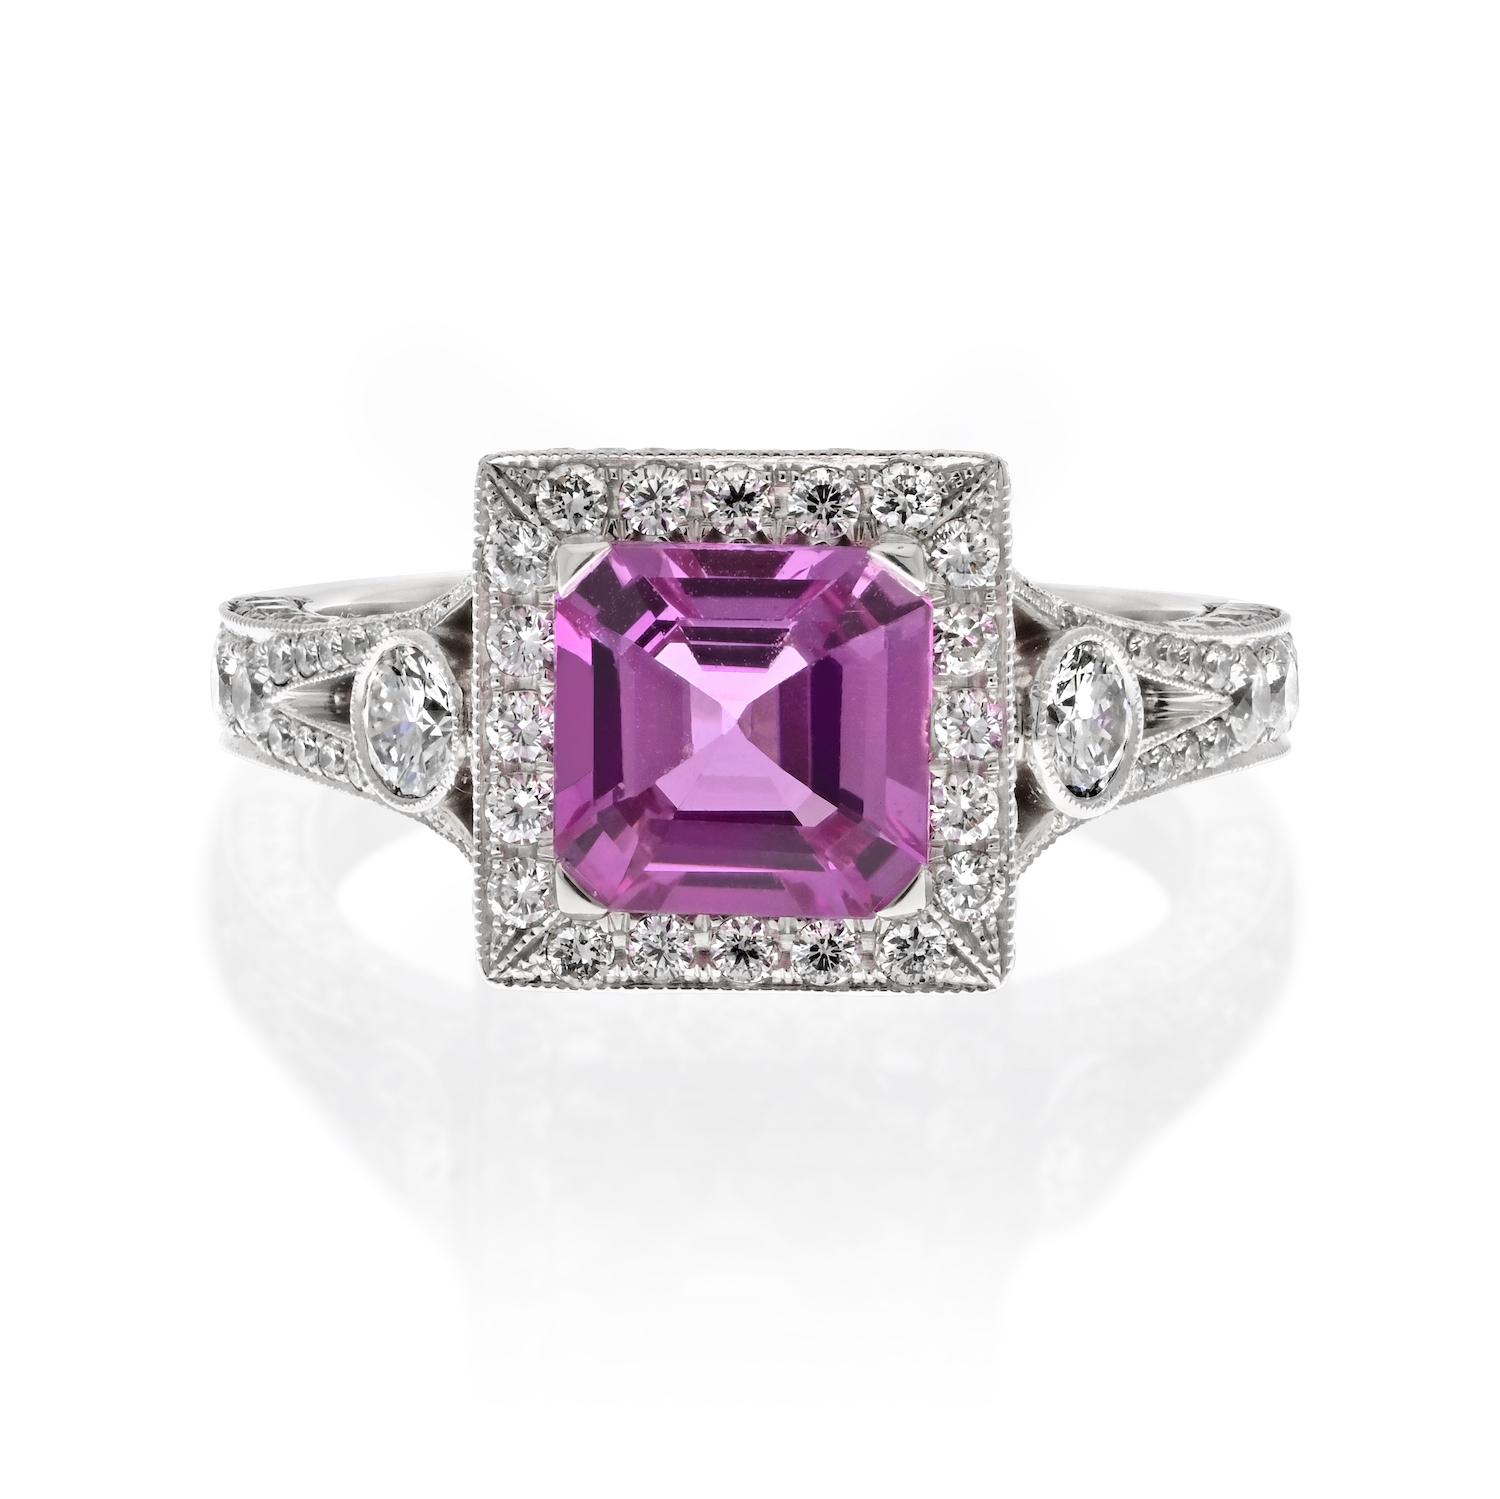 The Perfect Pink: Platinum Pink Sapphire Halo Engagement Ring.

At the heart of this ring is an Asscher cut pink sapphire, weighing 1.53 carats. This pink sapphire boasts a captivating pink hue, a symbol of love and romance. Held in a prong setting,